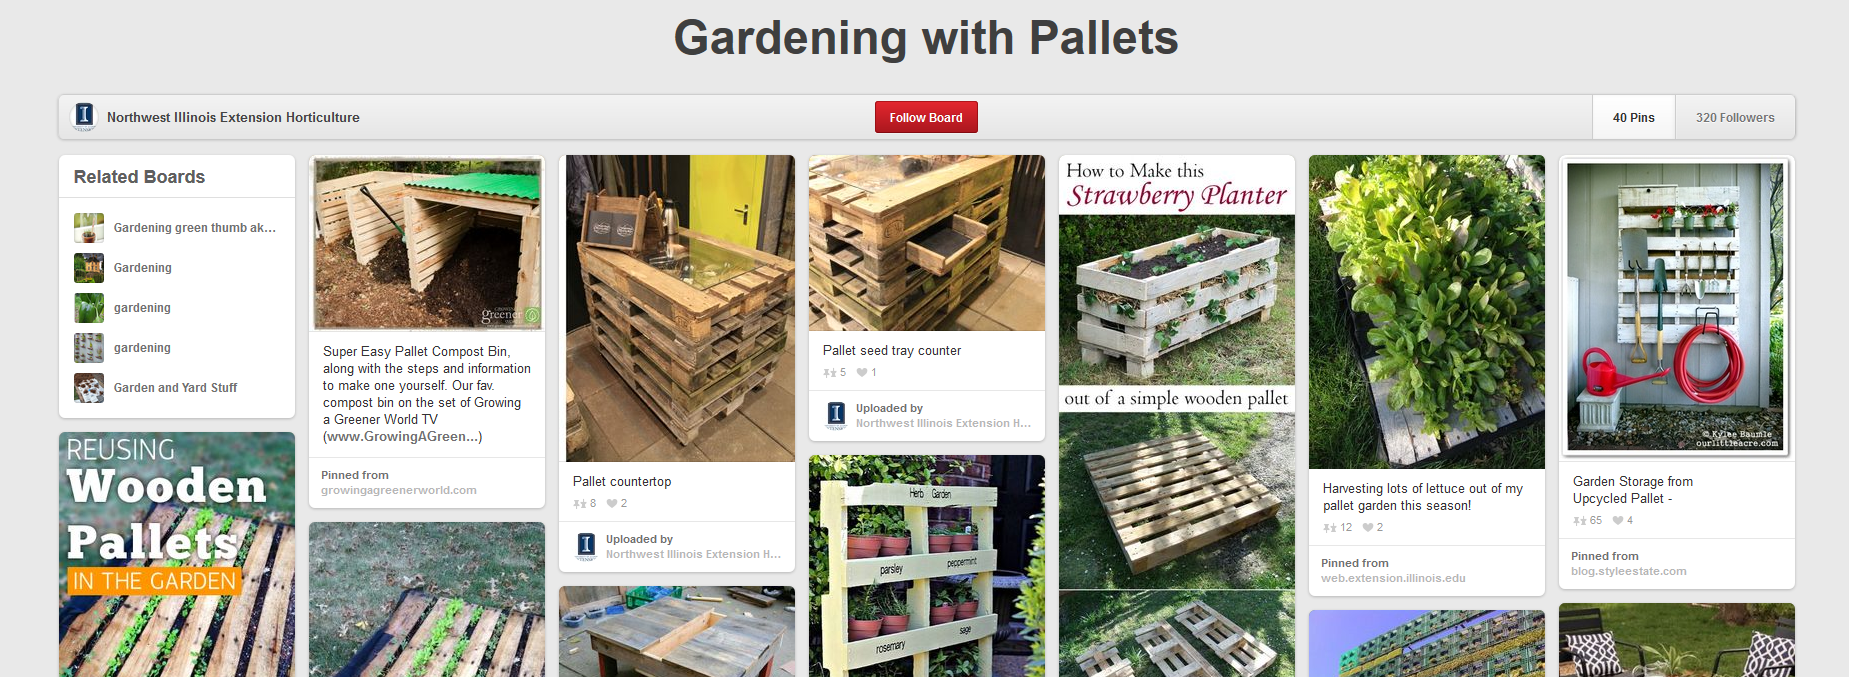 Are Wood Pallets Safe For Decorating?